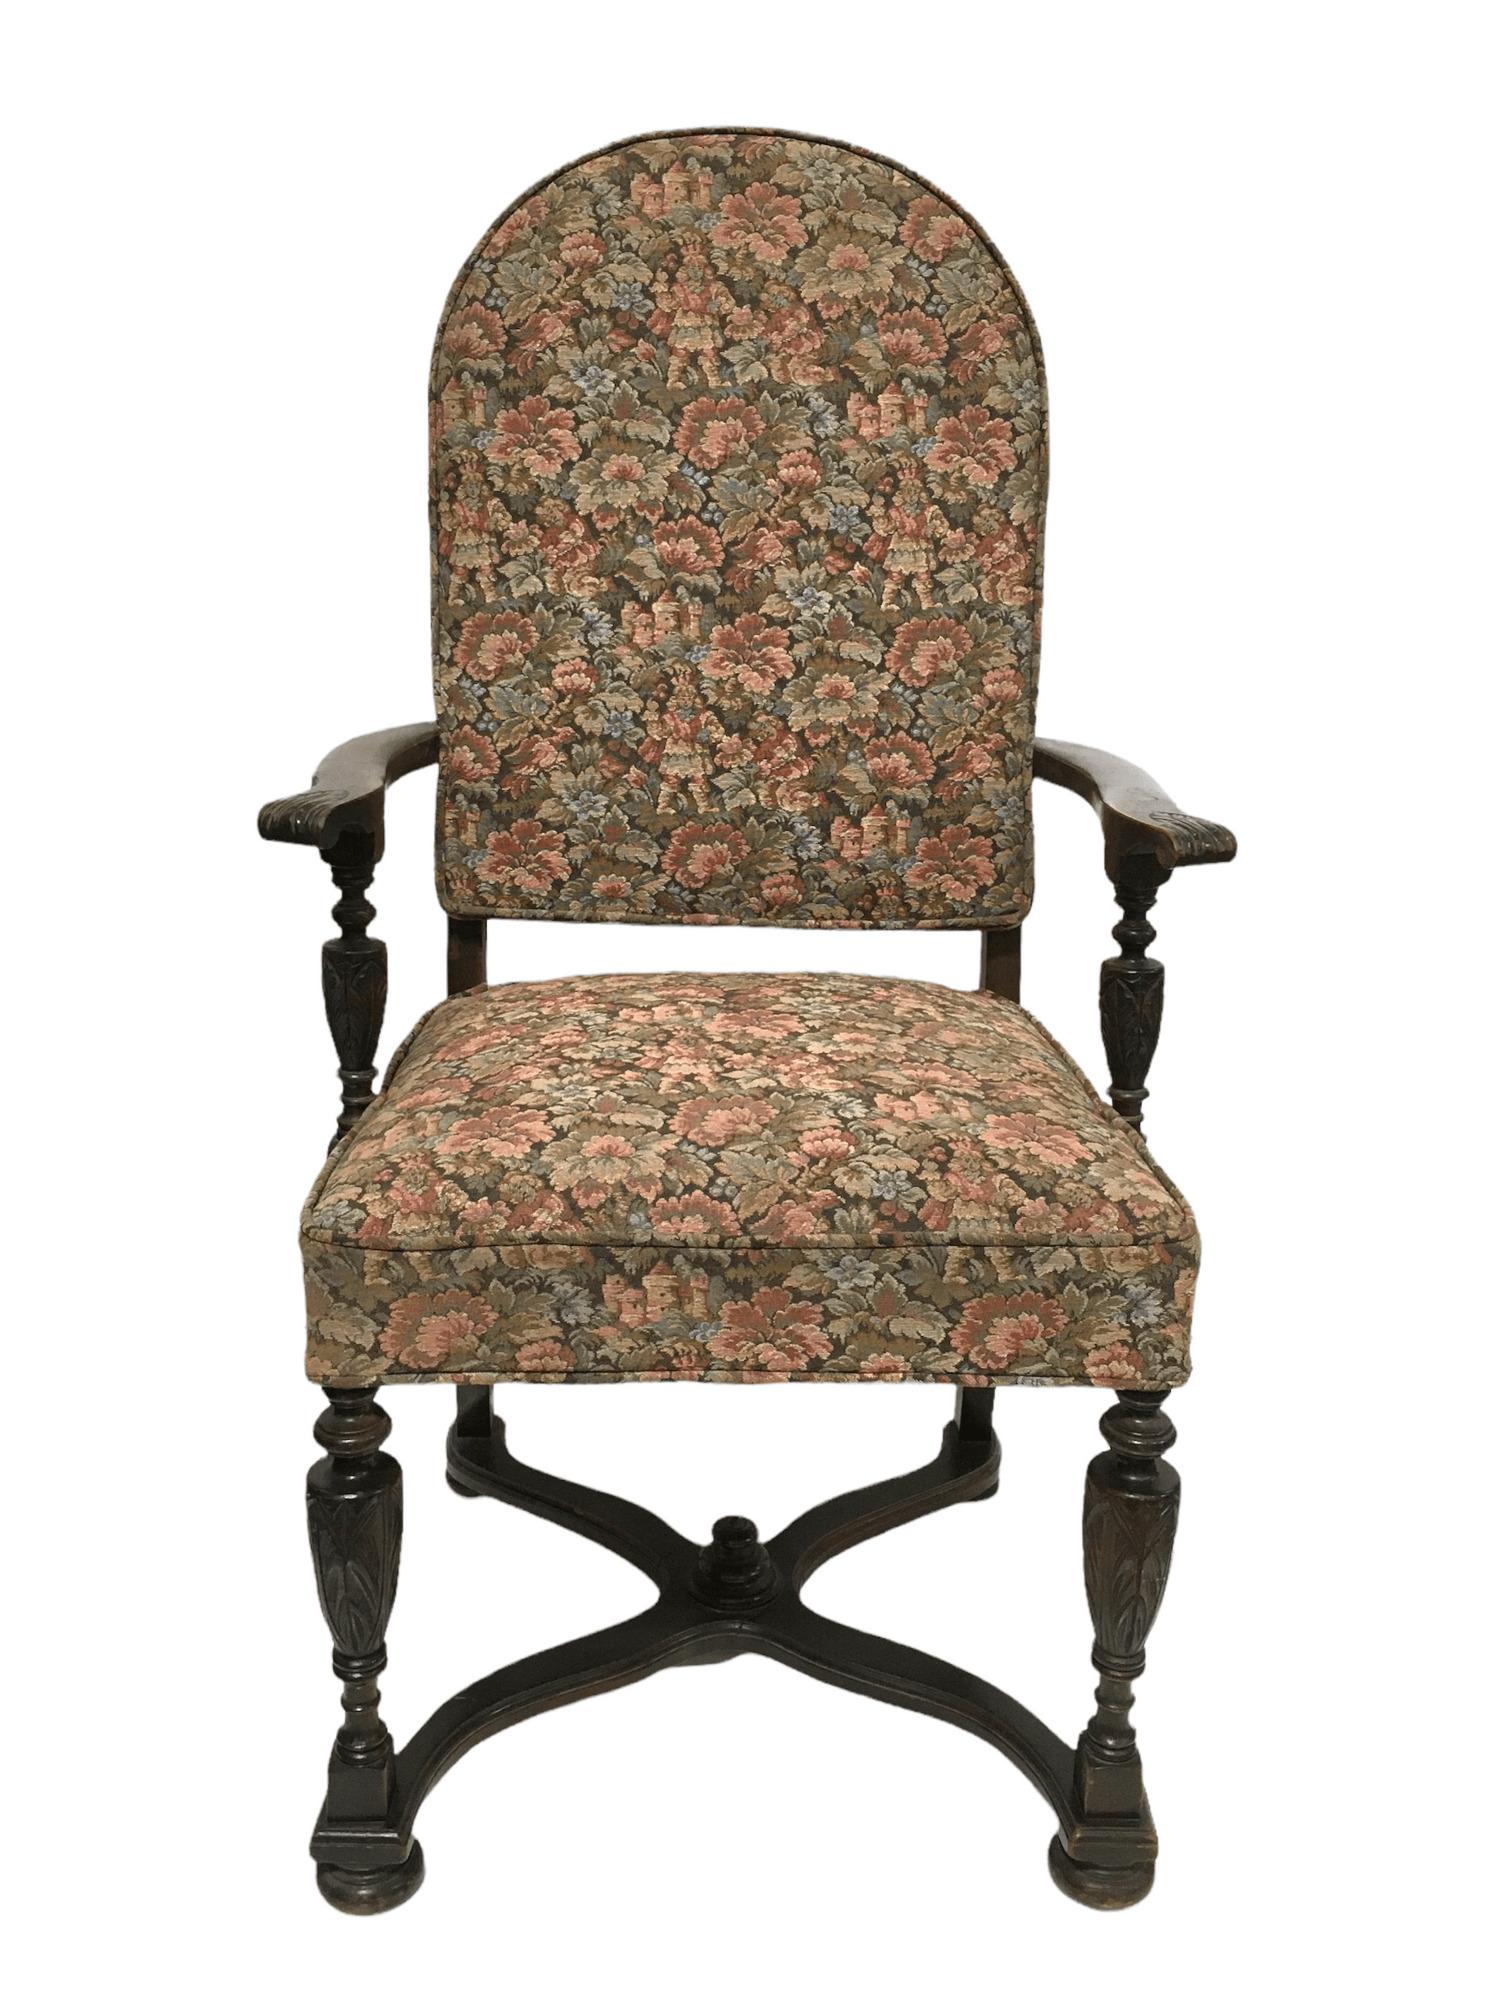 Antique walnut throne armchair with French Tapestry and carved wood. 19th XIX $875
 
This chair is a treasure from the past. Its solid walnut wood frame gives it stability and an elegant look, on top of the intricate floral carvings. Its fabric